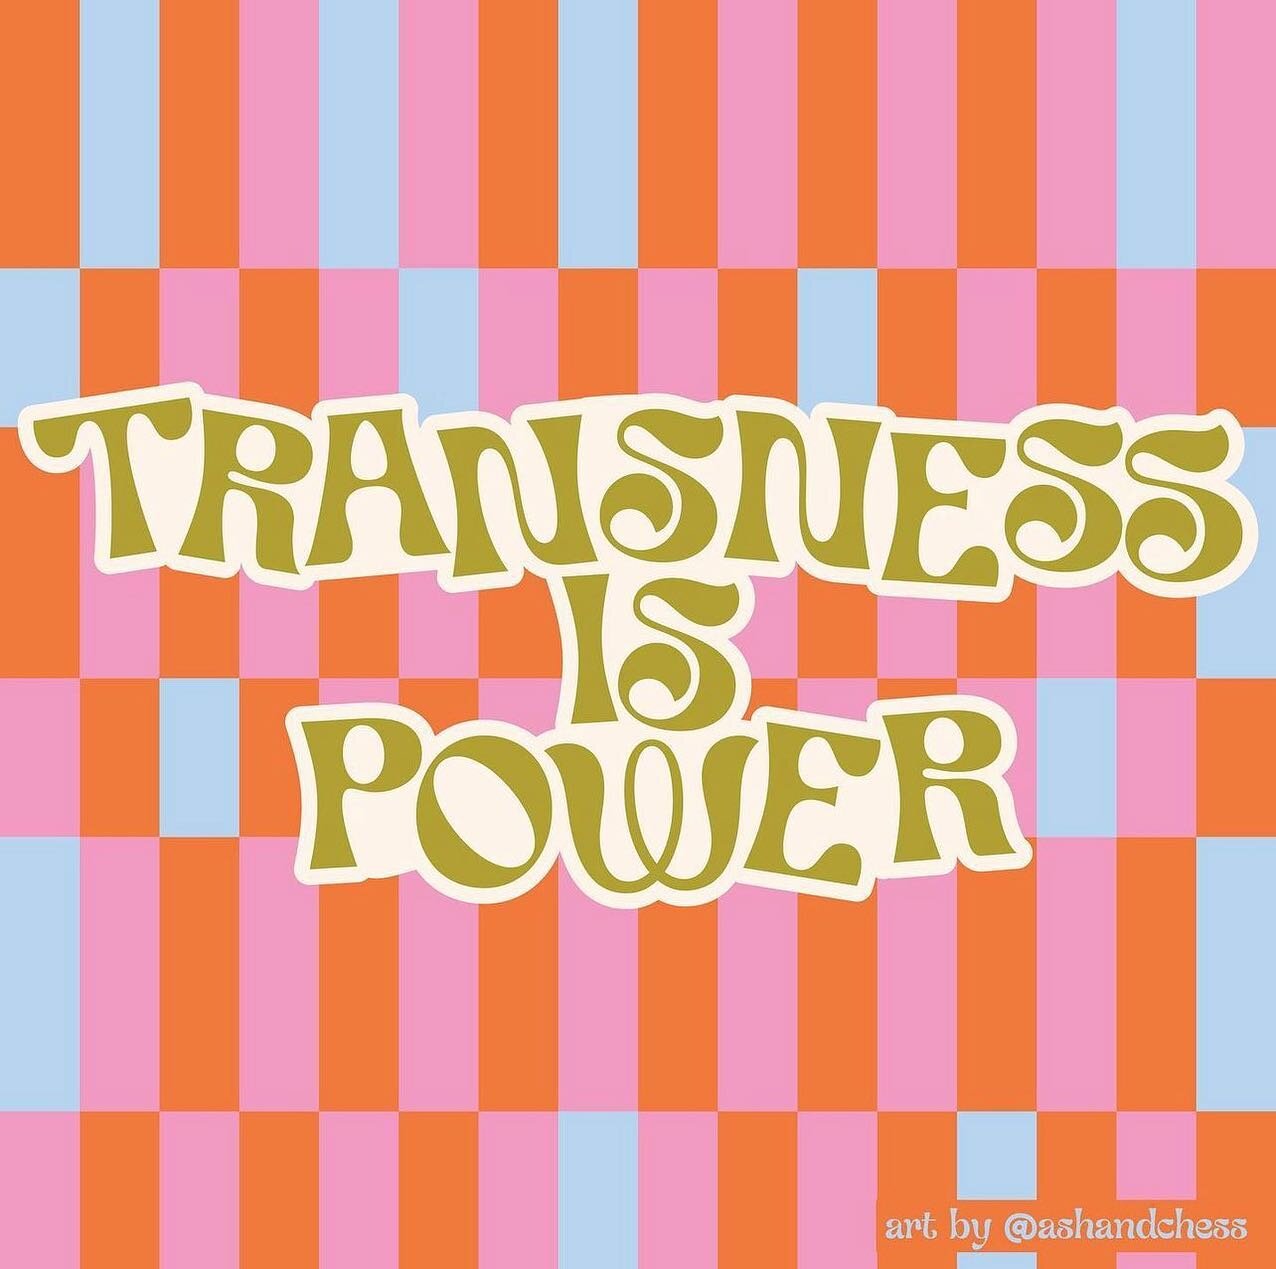 Trans Week is back for the third year! Historically just the Trans Day of Visibility, this annual observance has been expanded to a full week in order to shine a light on the growing attacks&mdash;especially legislative&mdash;against the trans commun